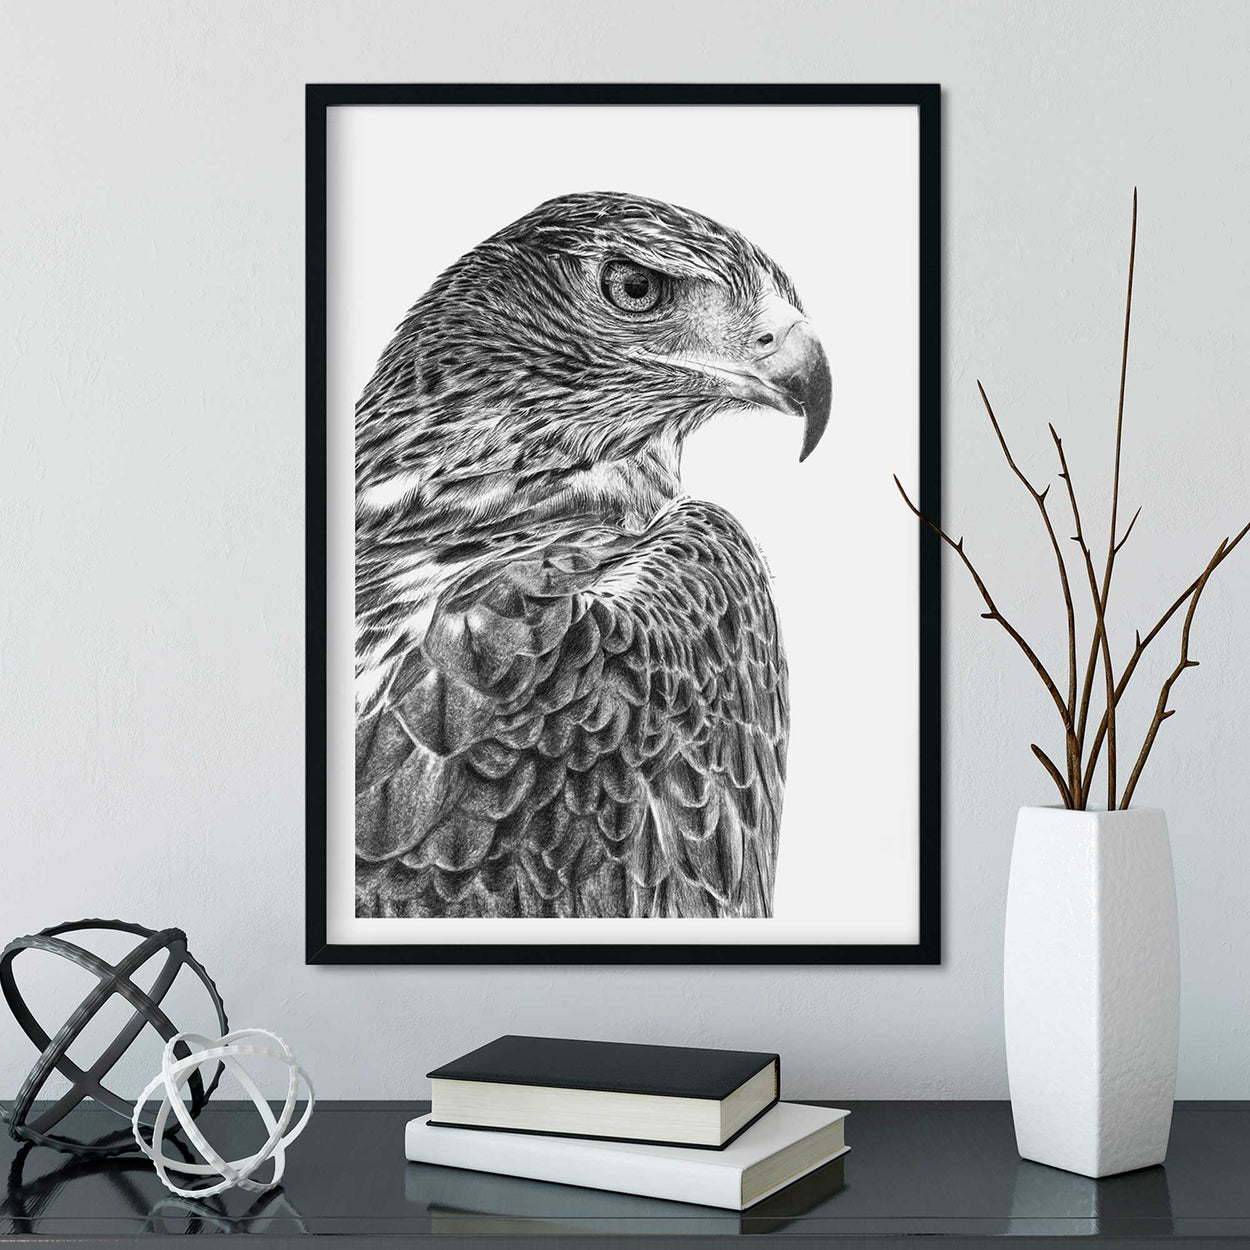 Black frame on wall containing black and white drawing of a golden eagle.  Desk below with books and vase on it.